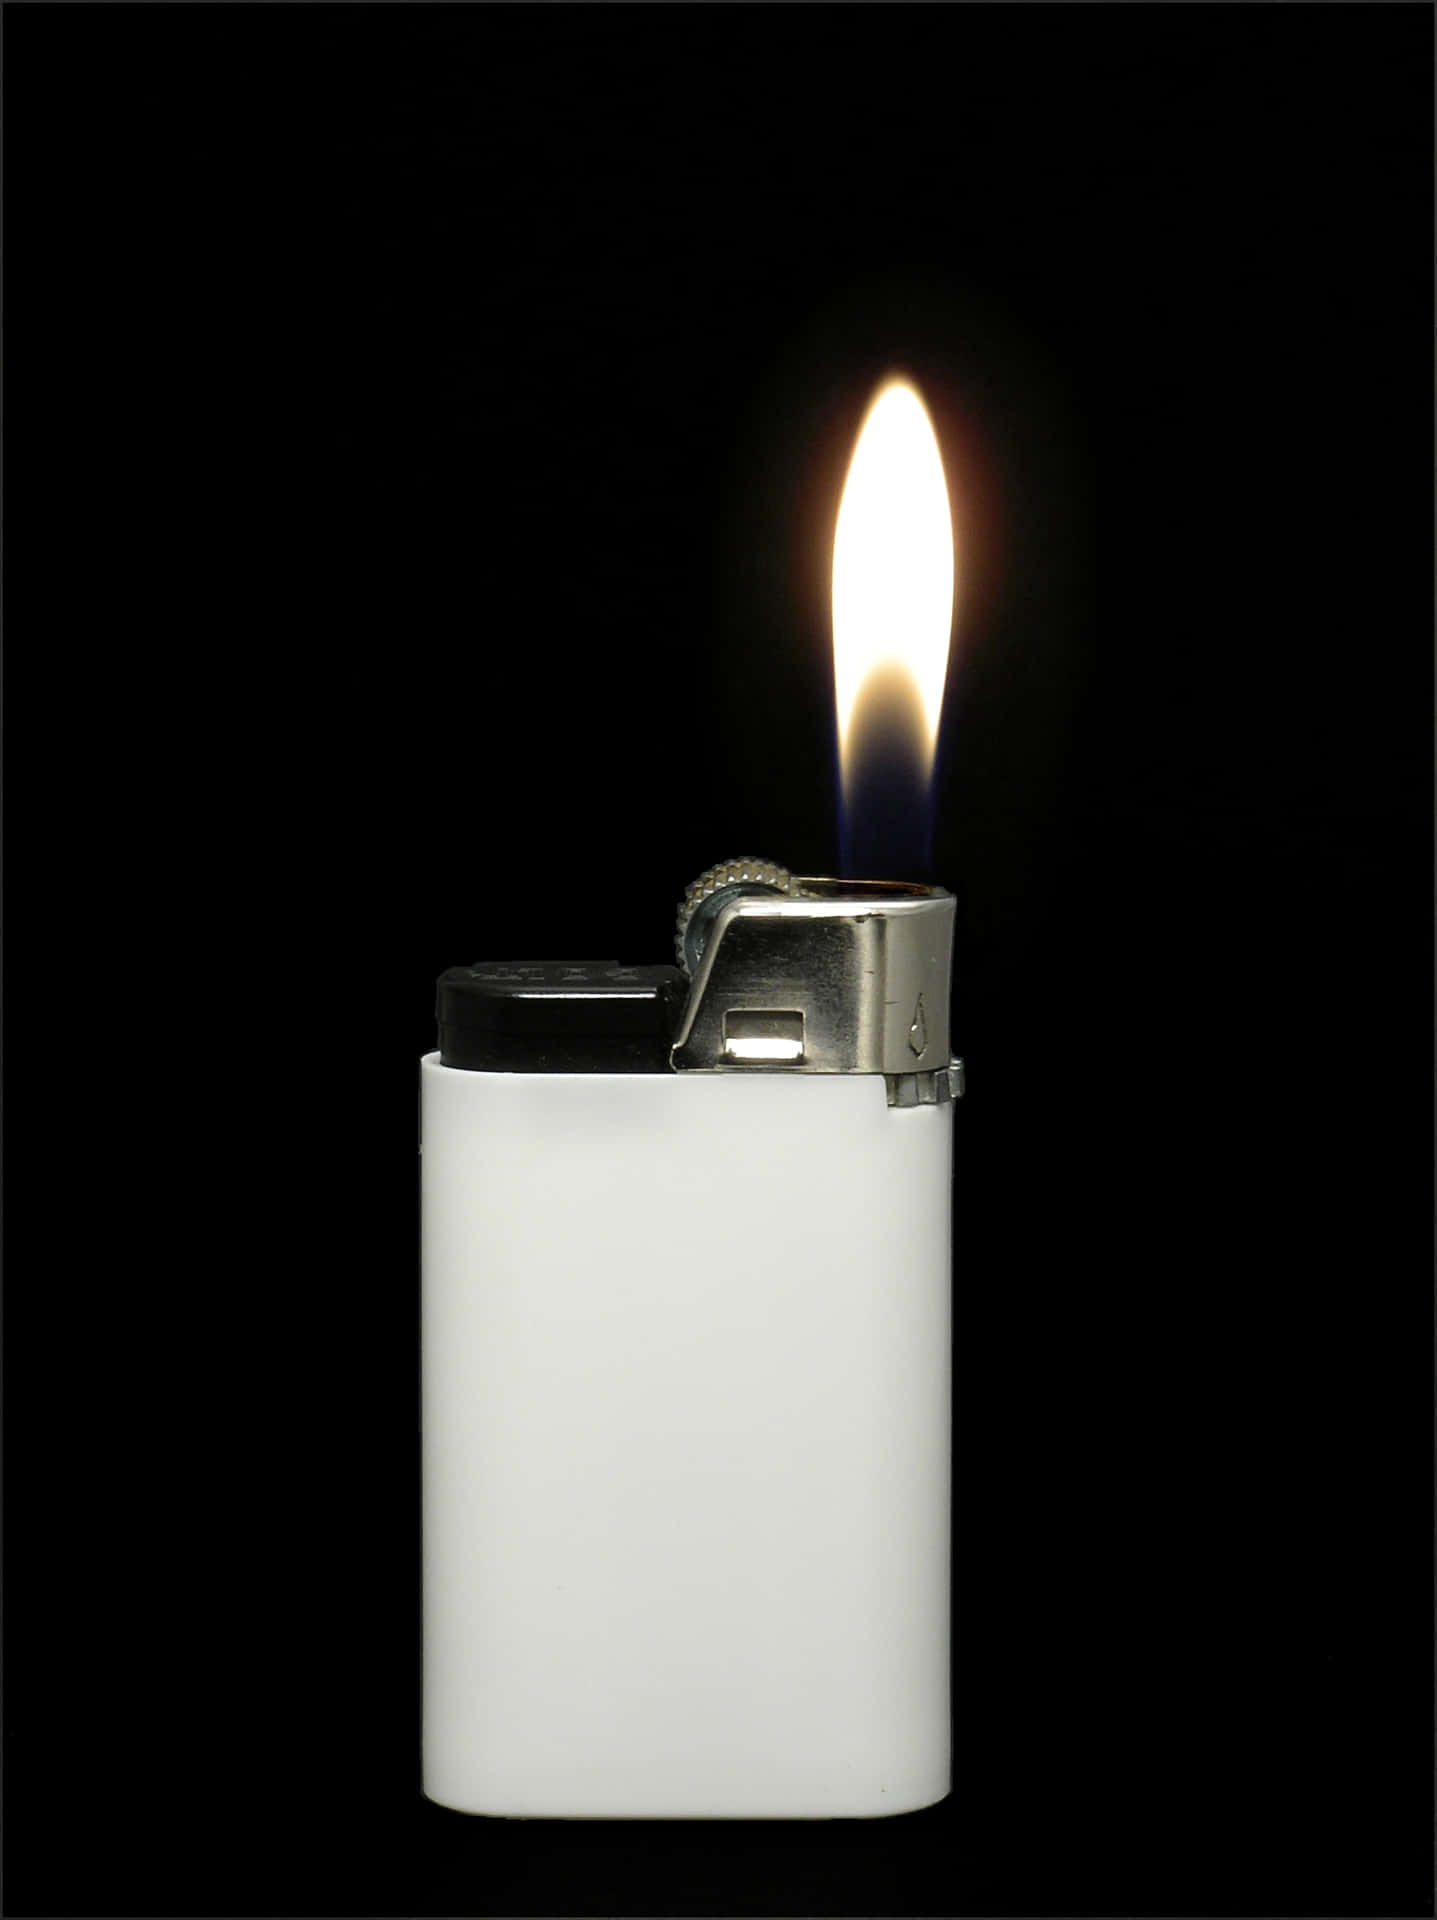 A shining lighter sparks flame in the darkness